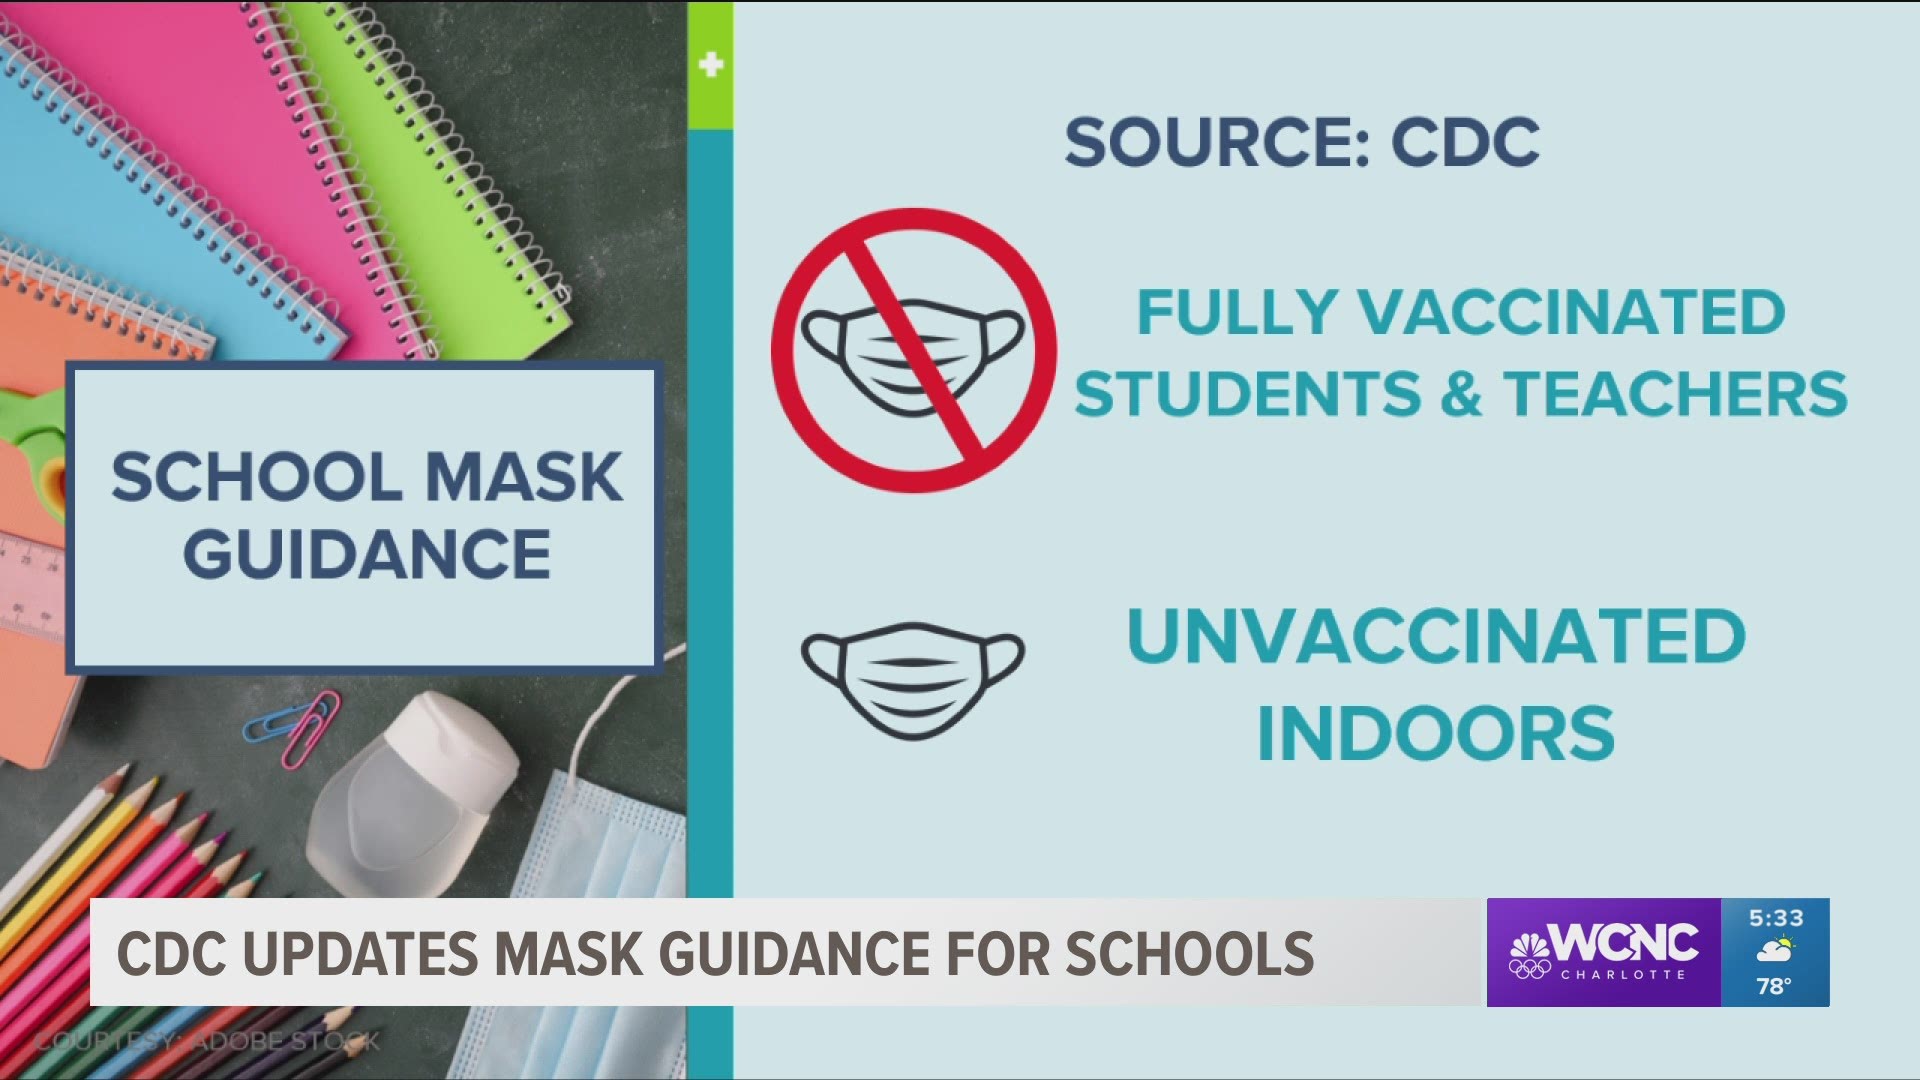 The CDC still recommends those who are unvaccinated wear masks indoors.